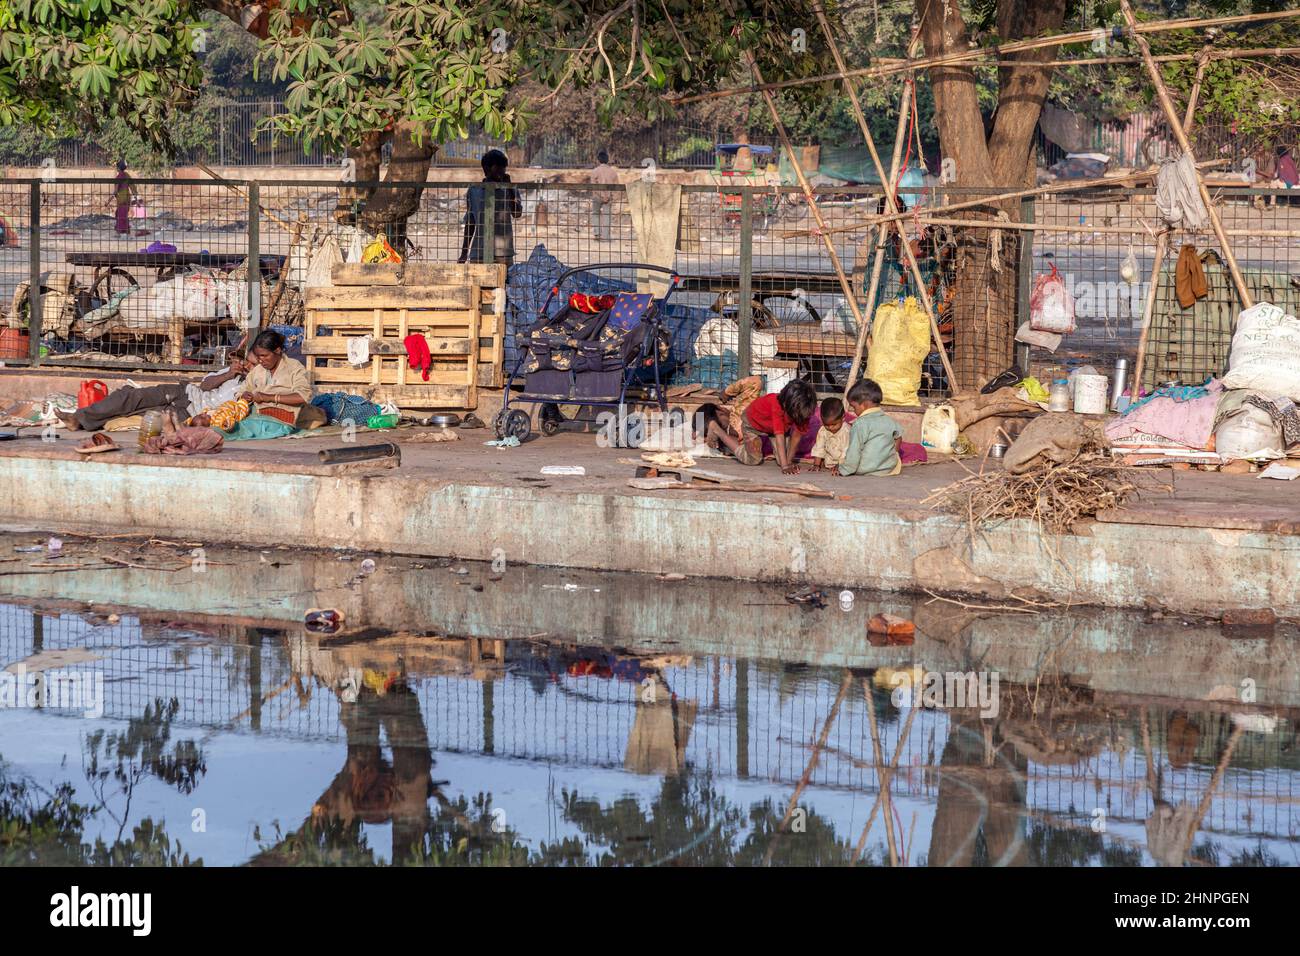 poor people live at the promenade of a canal near  Meena Bazaar Market in Old Delhi, India. Stock Photo